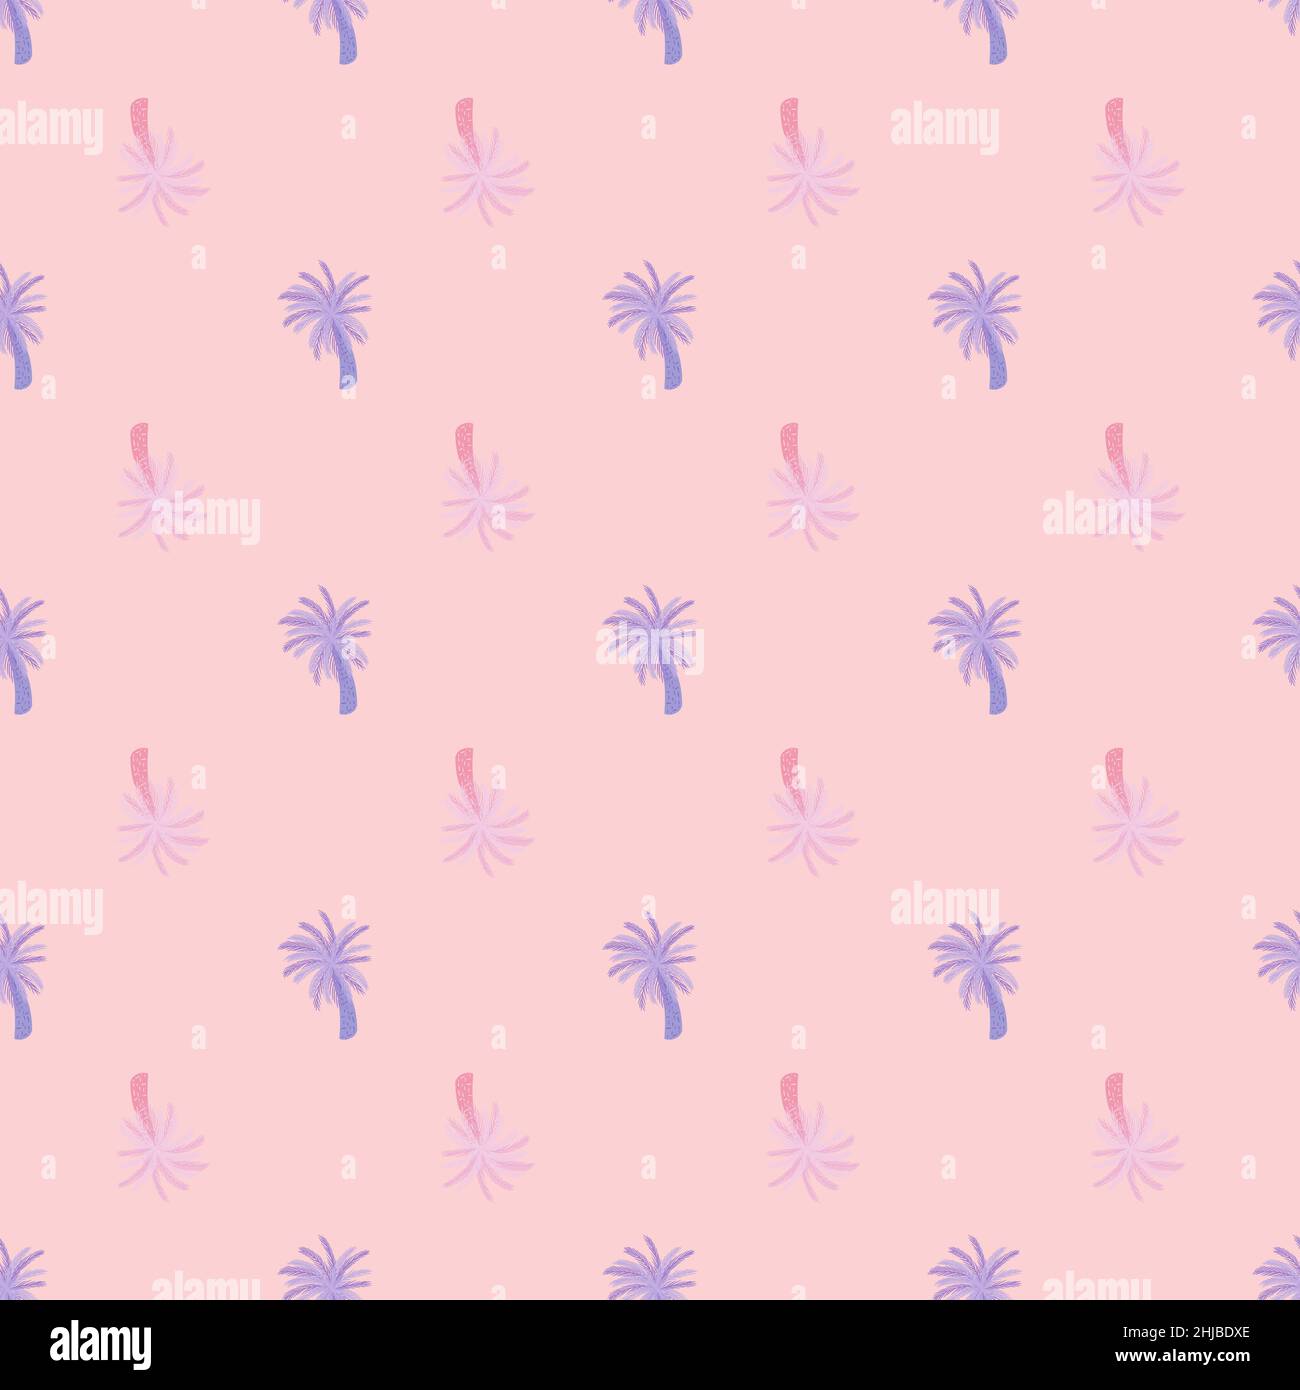 Decorative seamless pattern with purple pastel palm tree sute silhouettes. Light pink background. Flat vector print for textile, fabric, giftwrap, wal Stock Vector